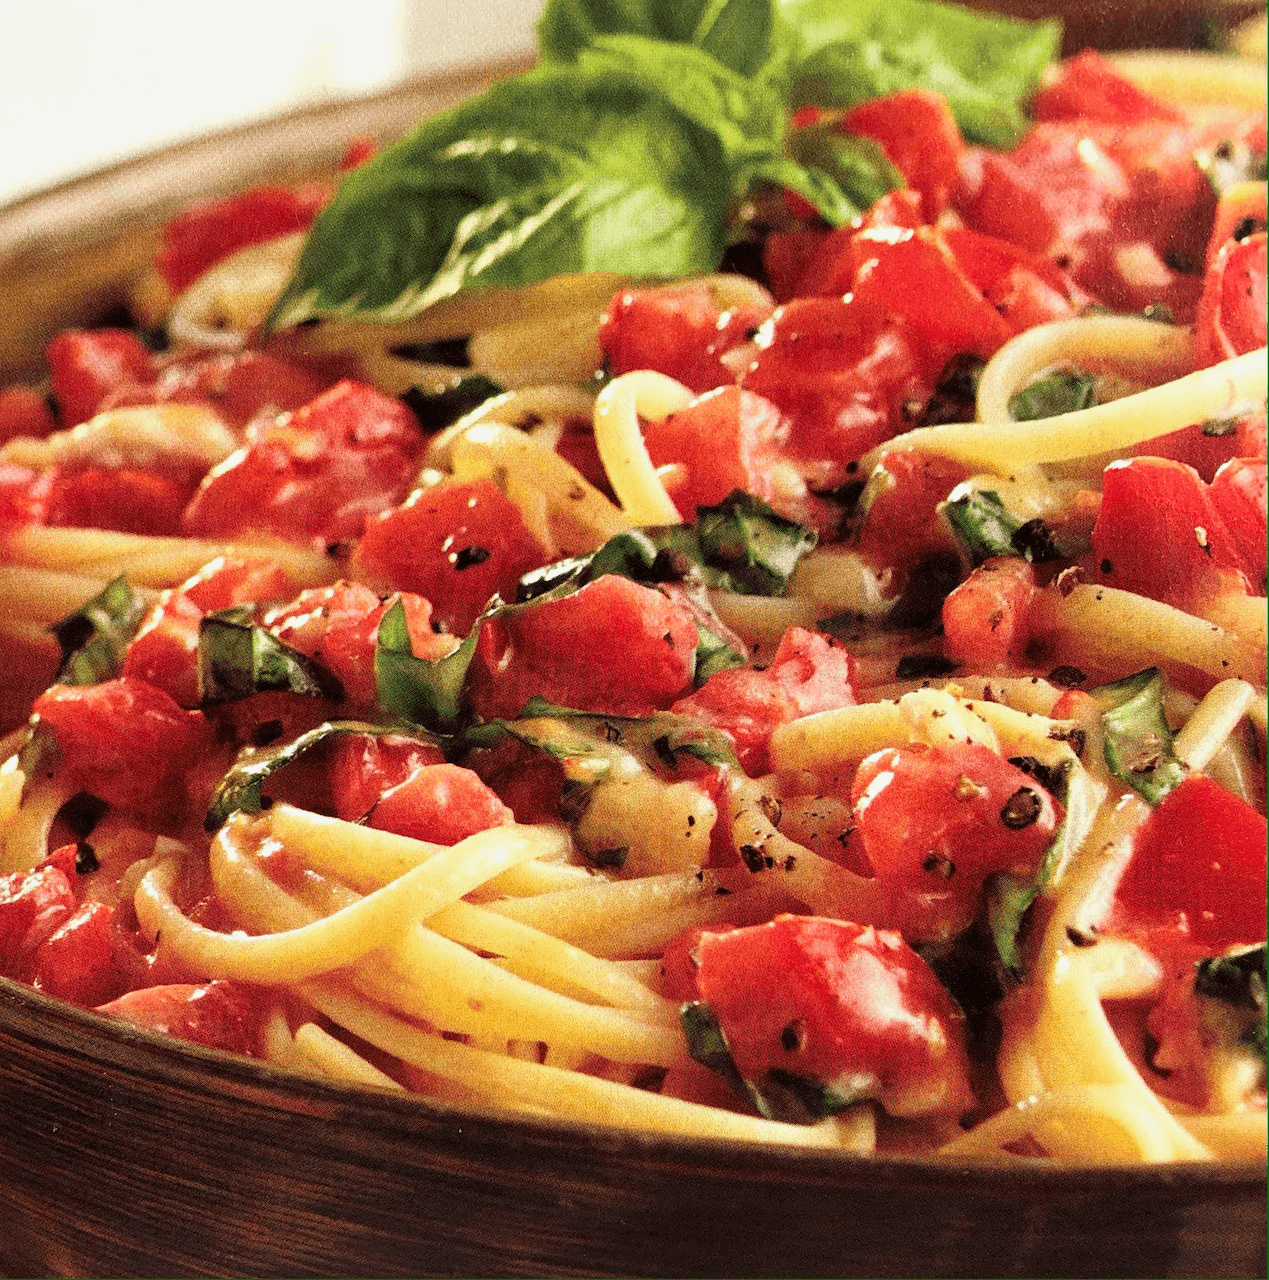 Linguine with tomato and basil pasta sauce